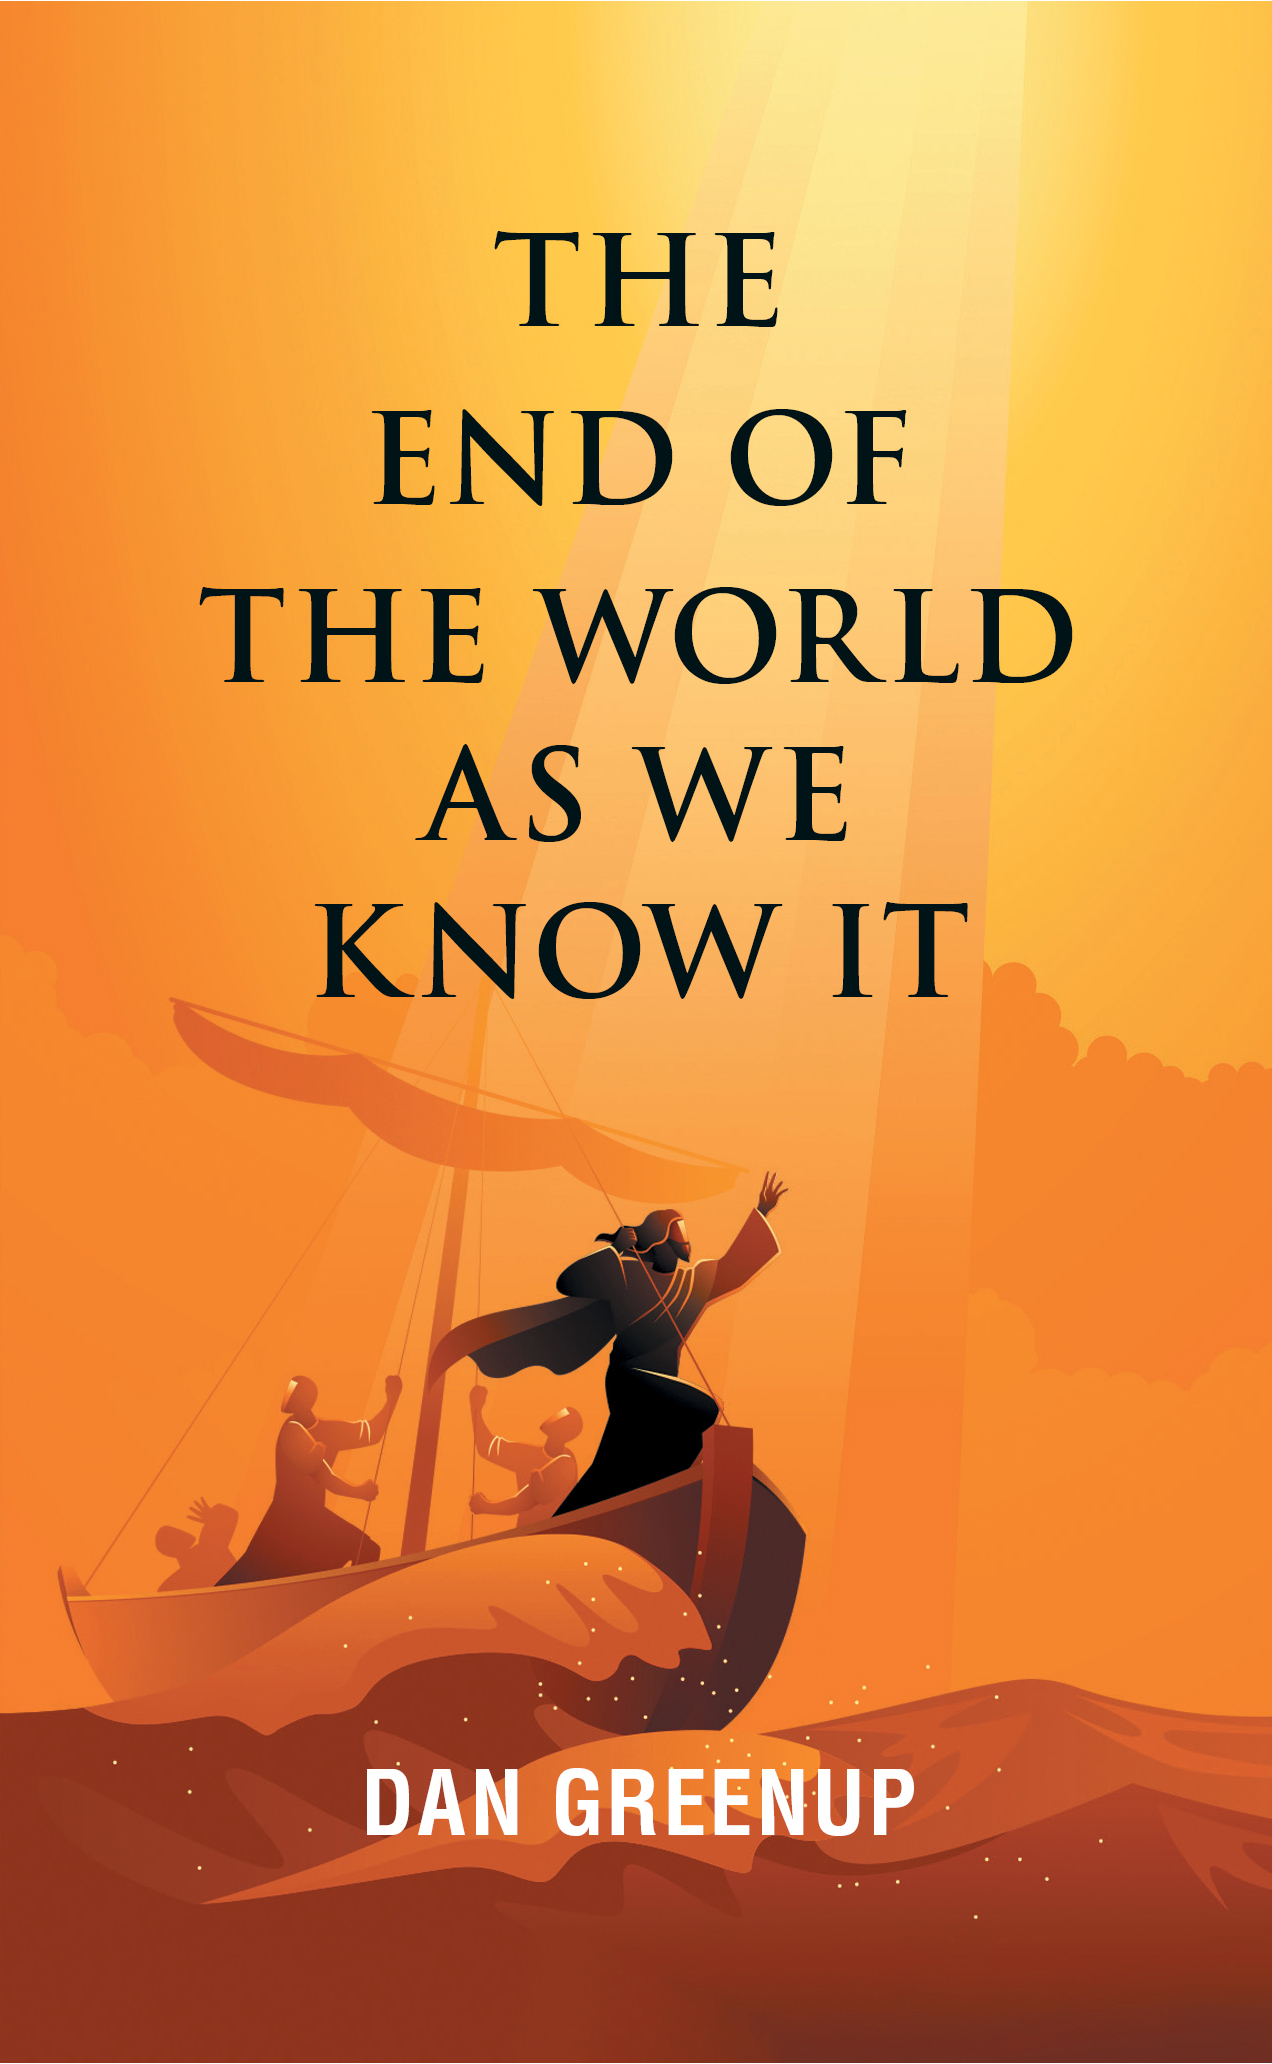 FREE: The End of the World as We Know It by Dan Greenup